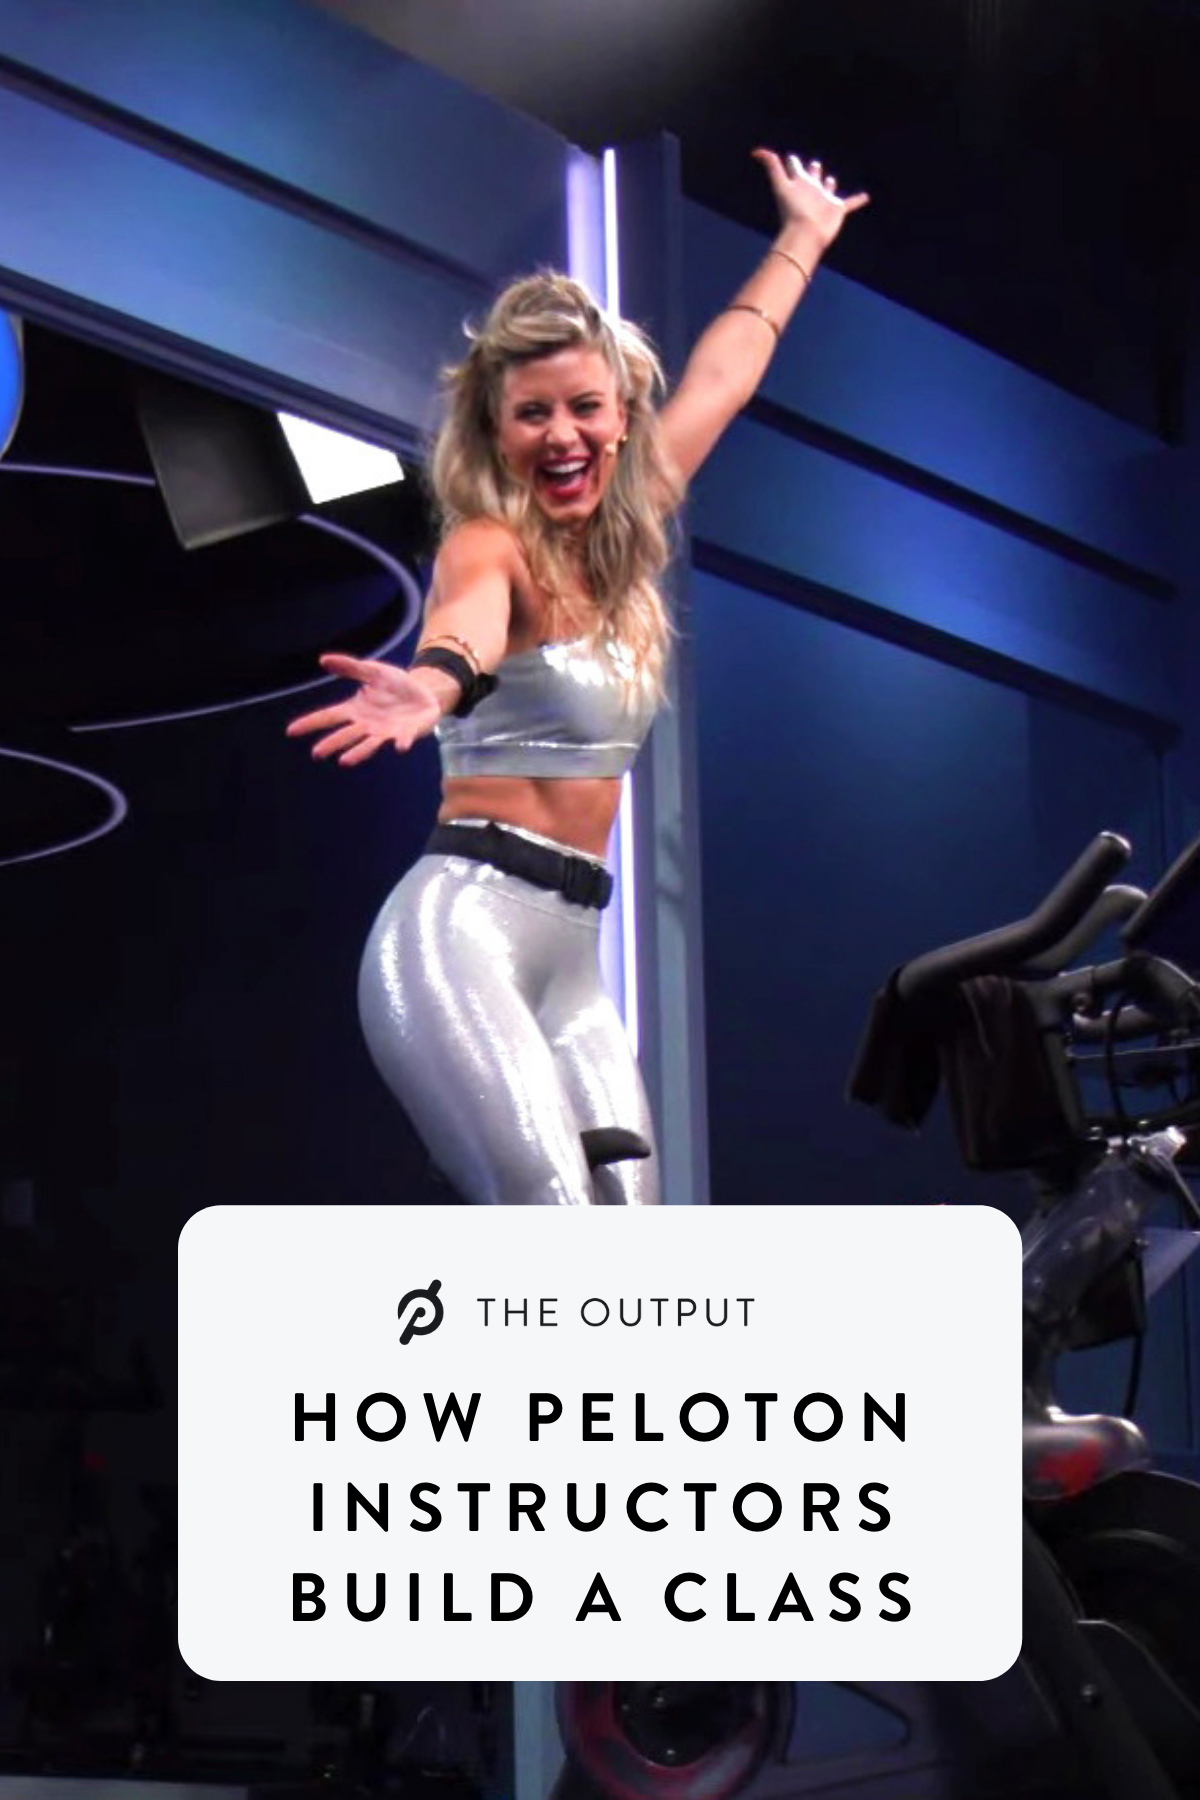 These Powerhouse Peloton Instructors Inspire Positive Change for